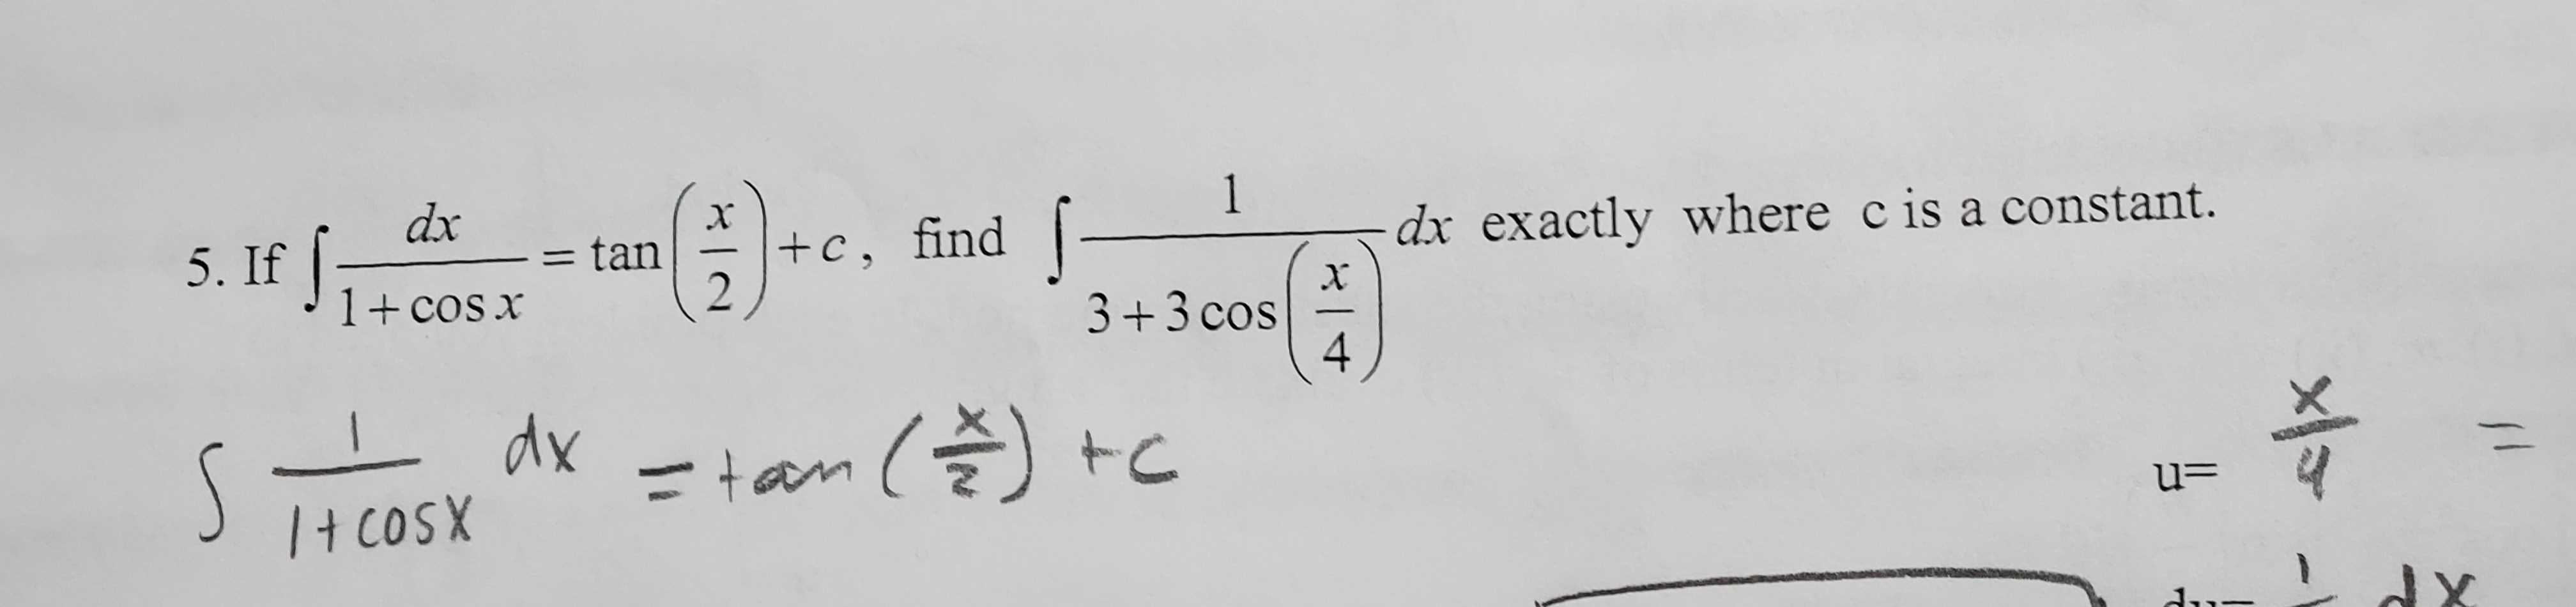 1
dx
x
+c, find-
dx exactly where c is a constant.
5. If
1+cos x
= tan
2
X
3+3 cos
4
n
dx
tam
S
c
/+ CoSX
